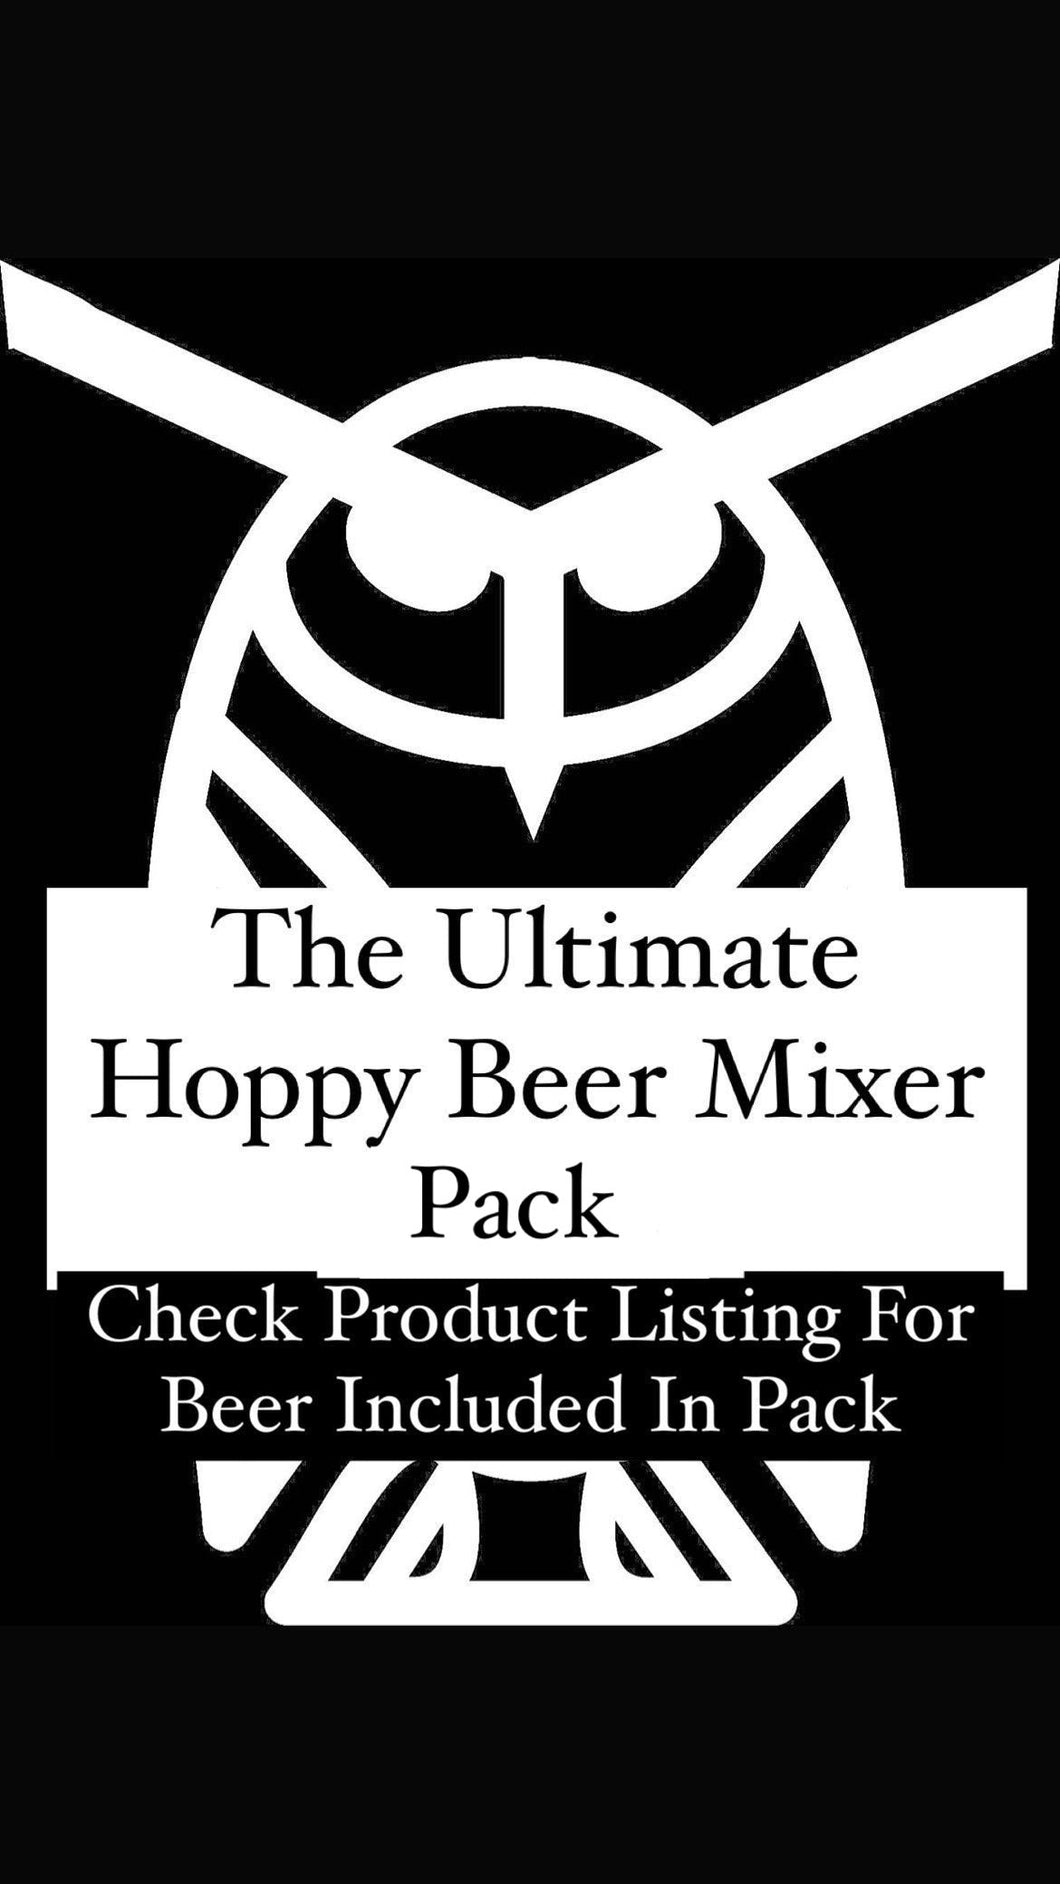 The Ultimate Hoppy Beer Mixer (12 Pack - 2 of each Check Product Listing for Beer)